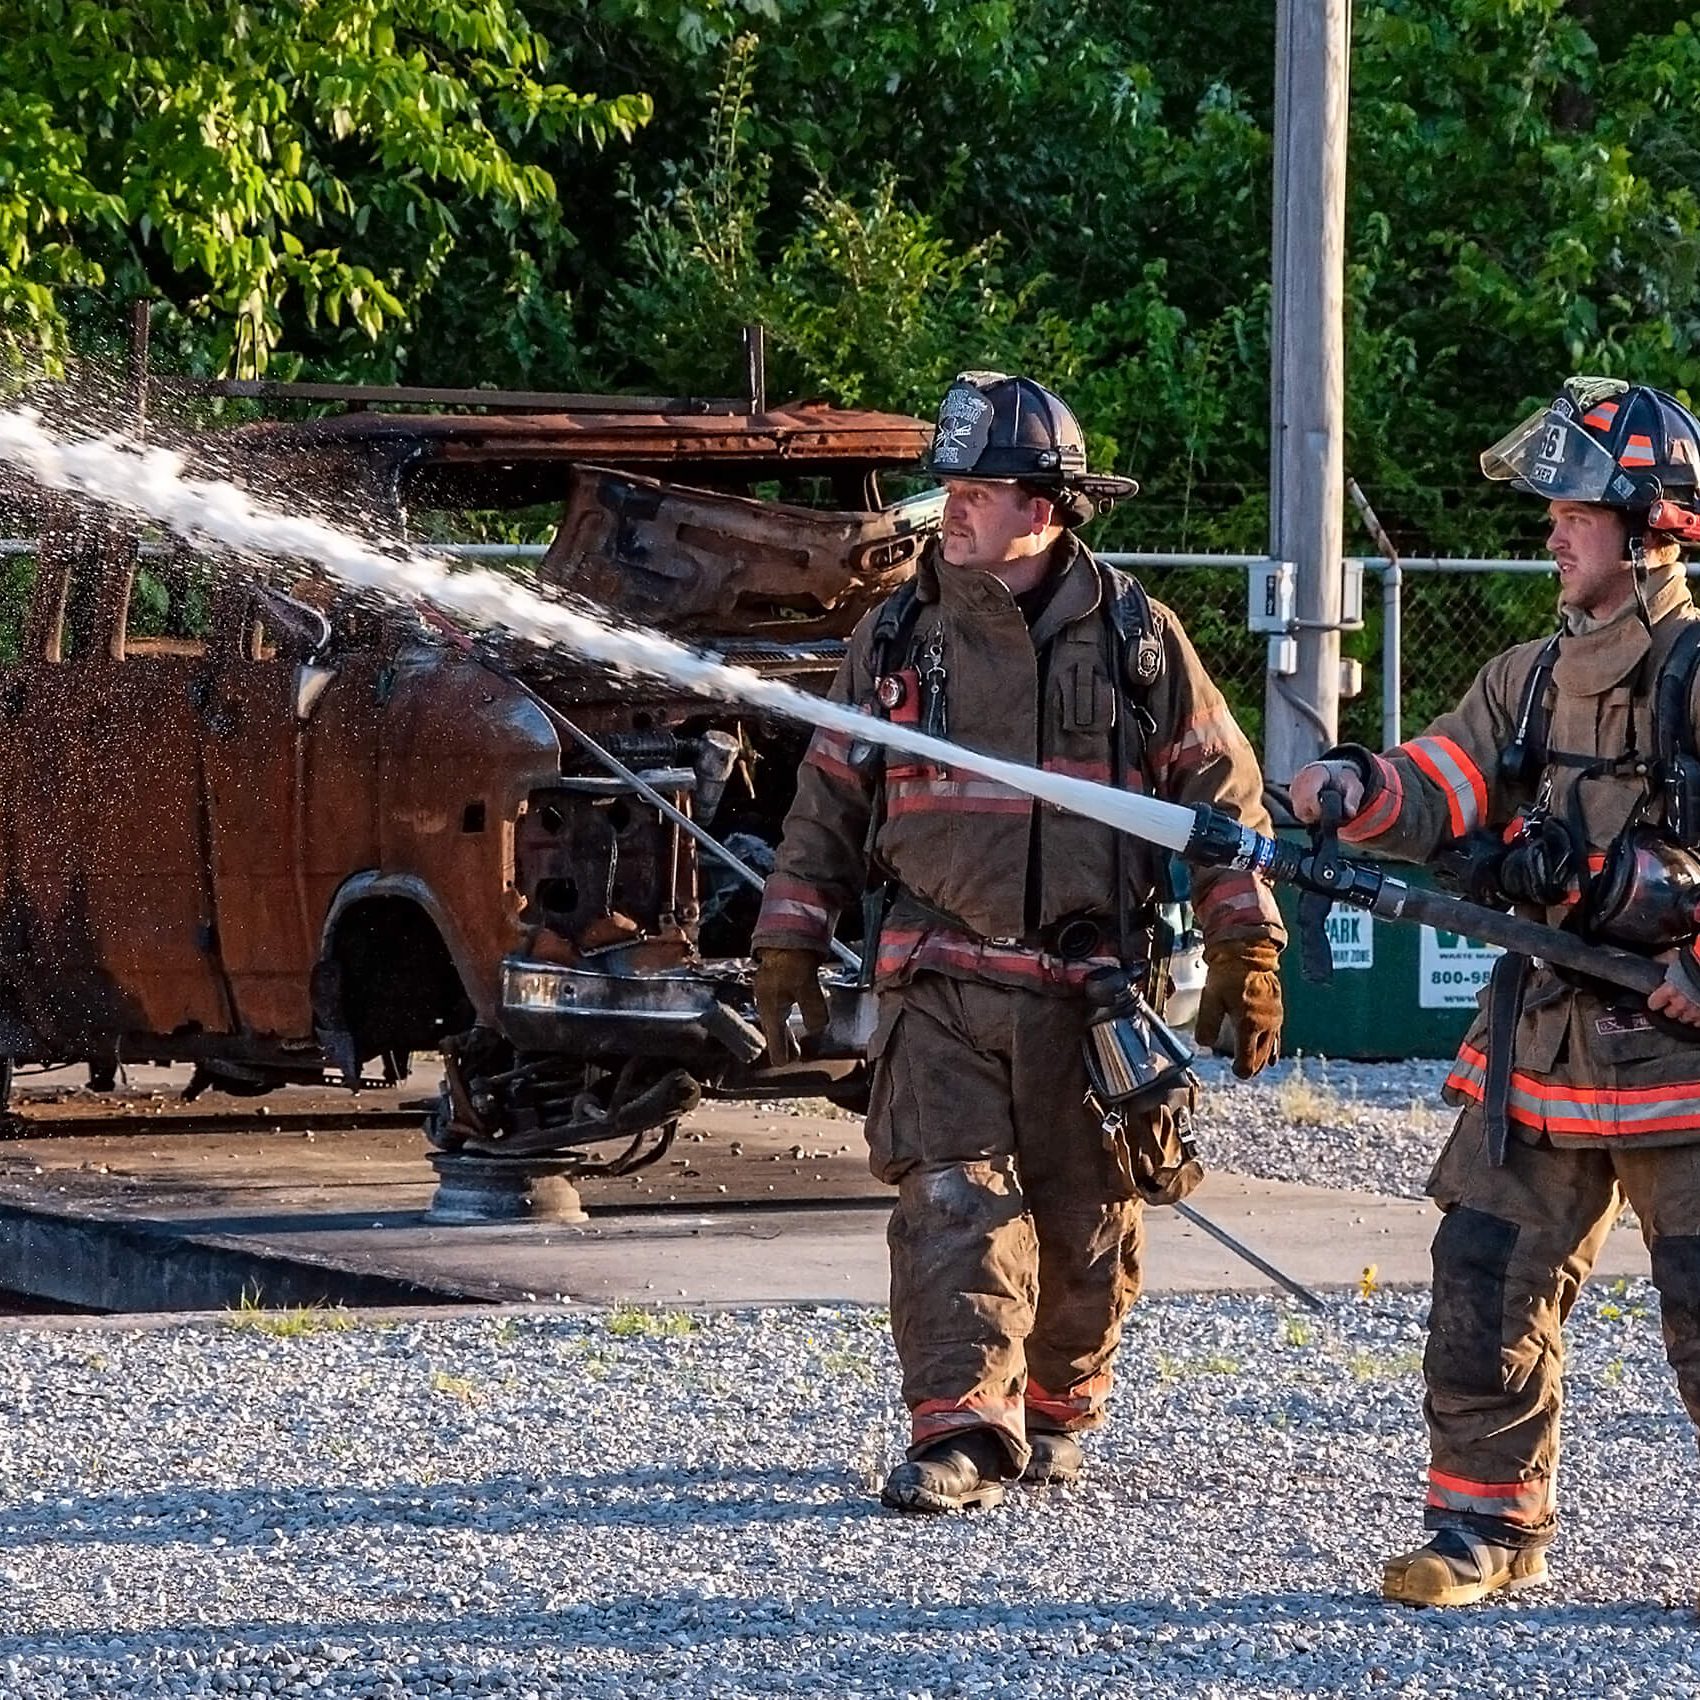 Fireman and trainer with fire hose preparing for a training exercise.